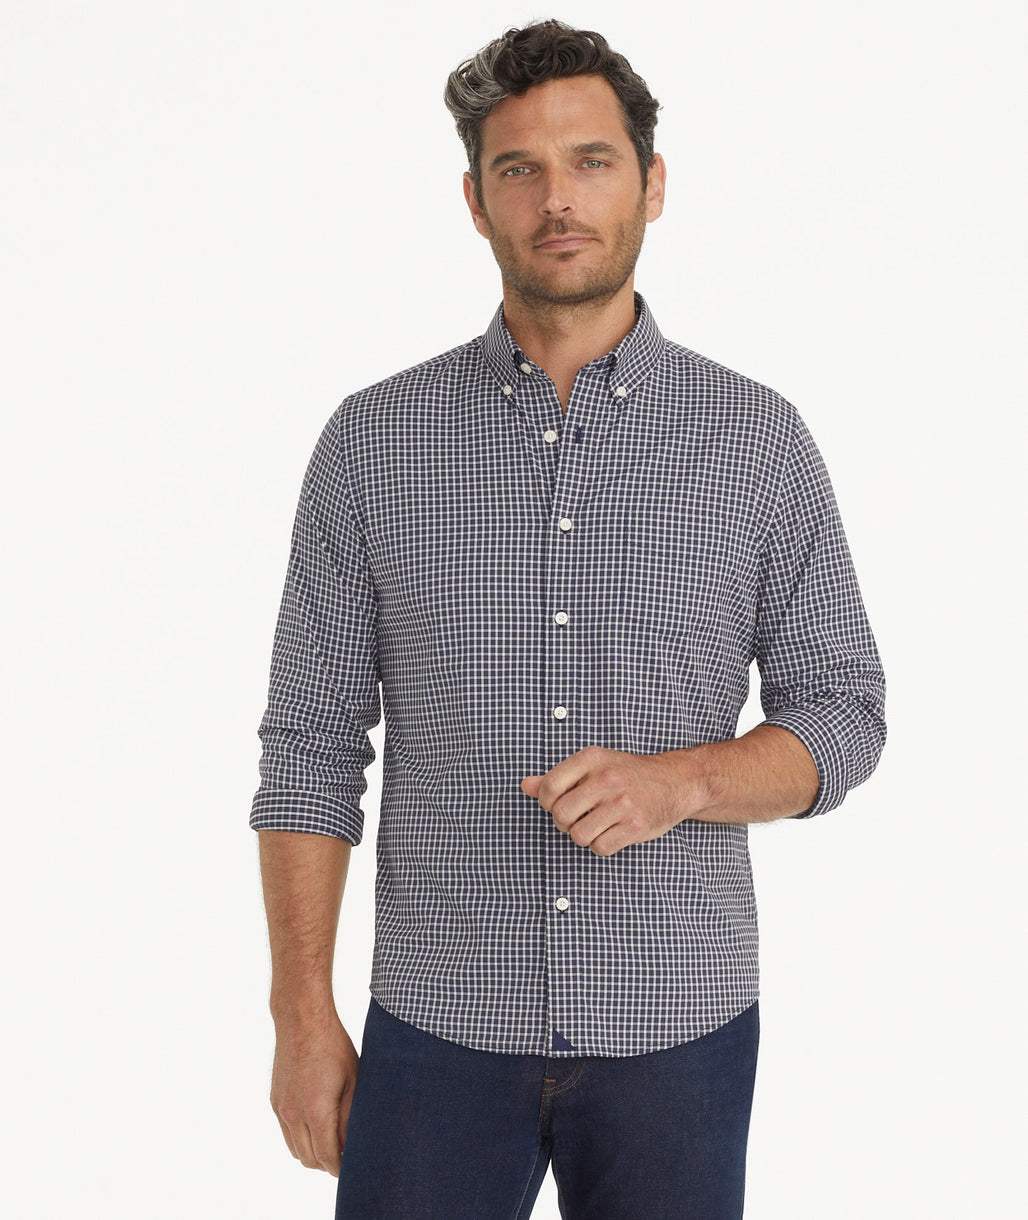 Model is wearing UNTUCKit Wrinkle-Free Performance Tully Shirt inNavy & Red Check.